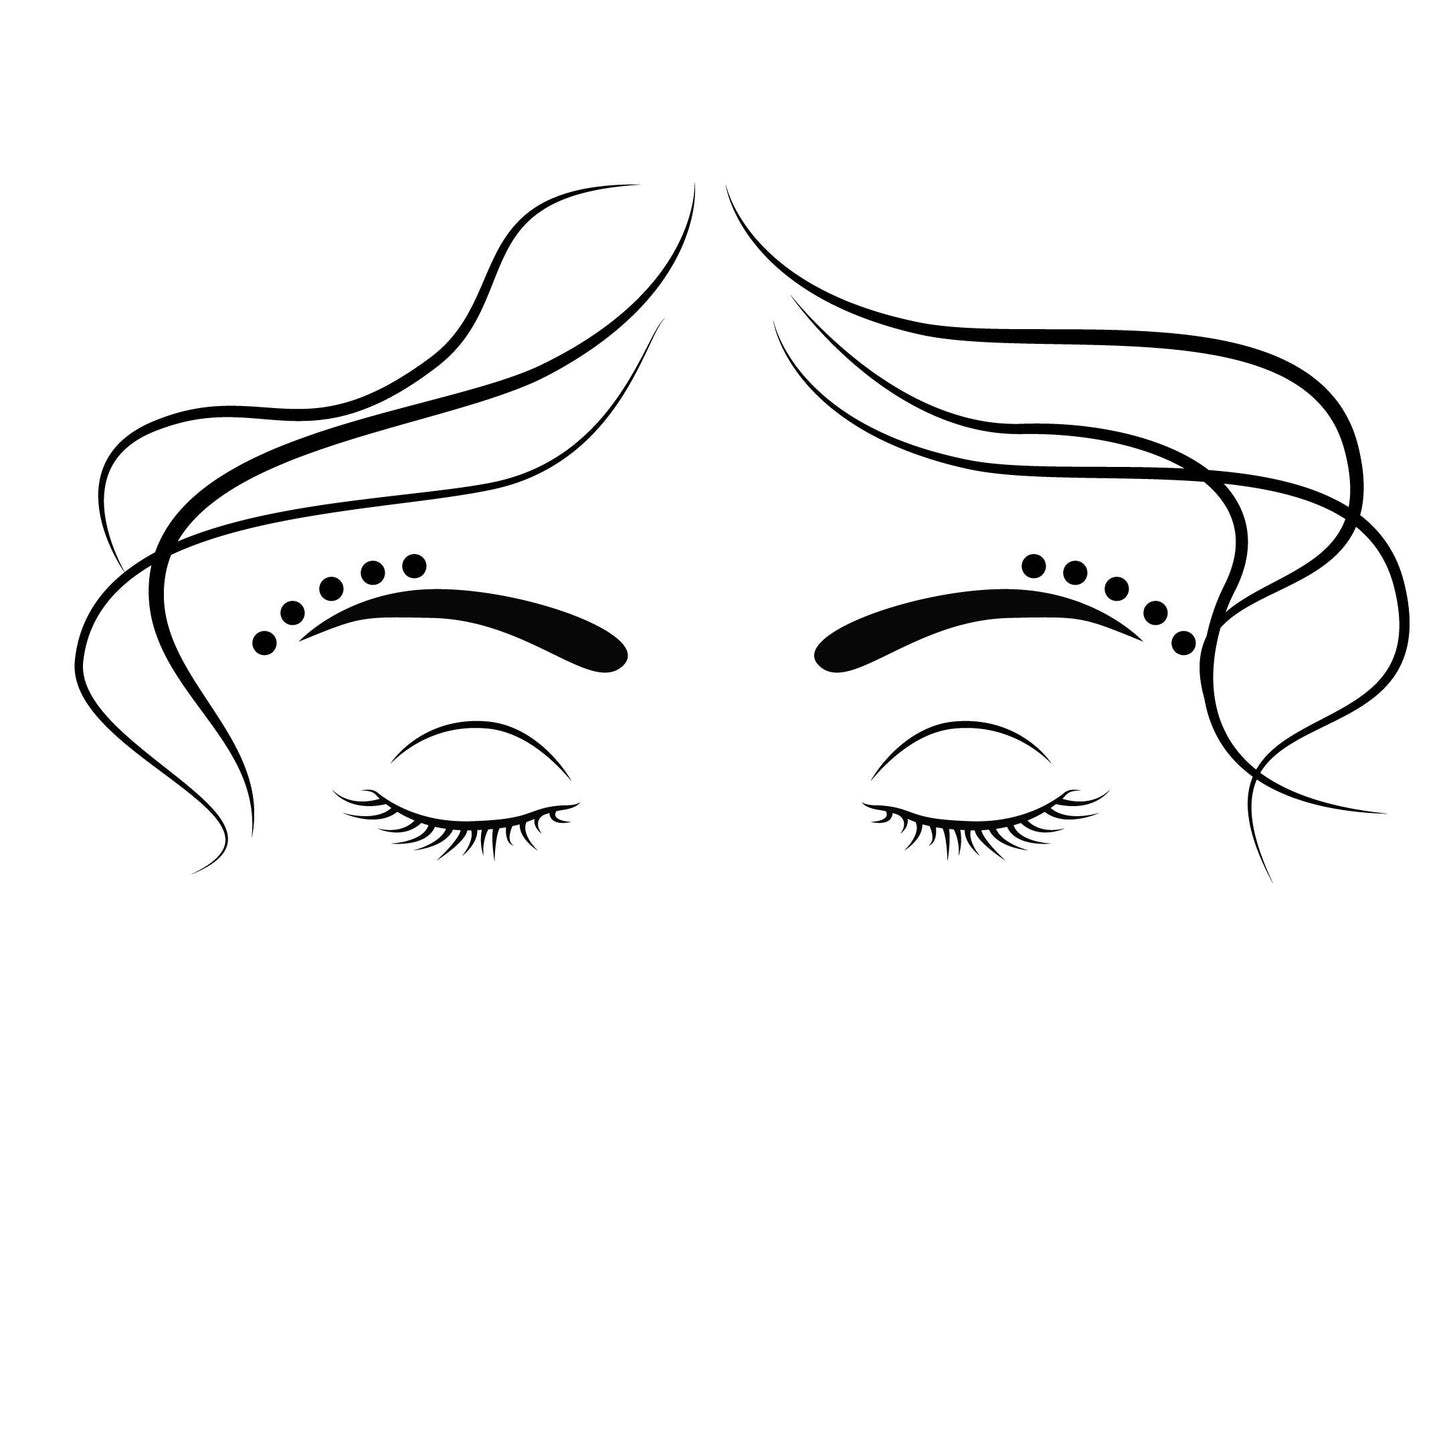 Hair and Eyes Vinyl Wall Decal - Attractive design for spa, beauty salon, spa, makeup studio - Great for girls room